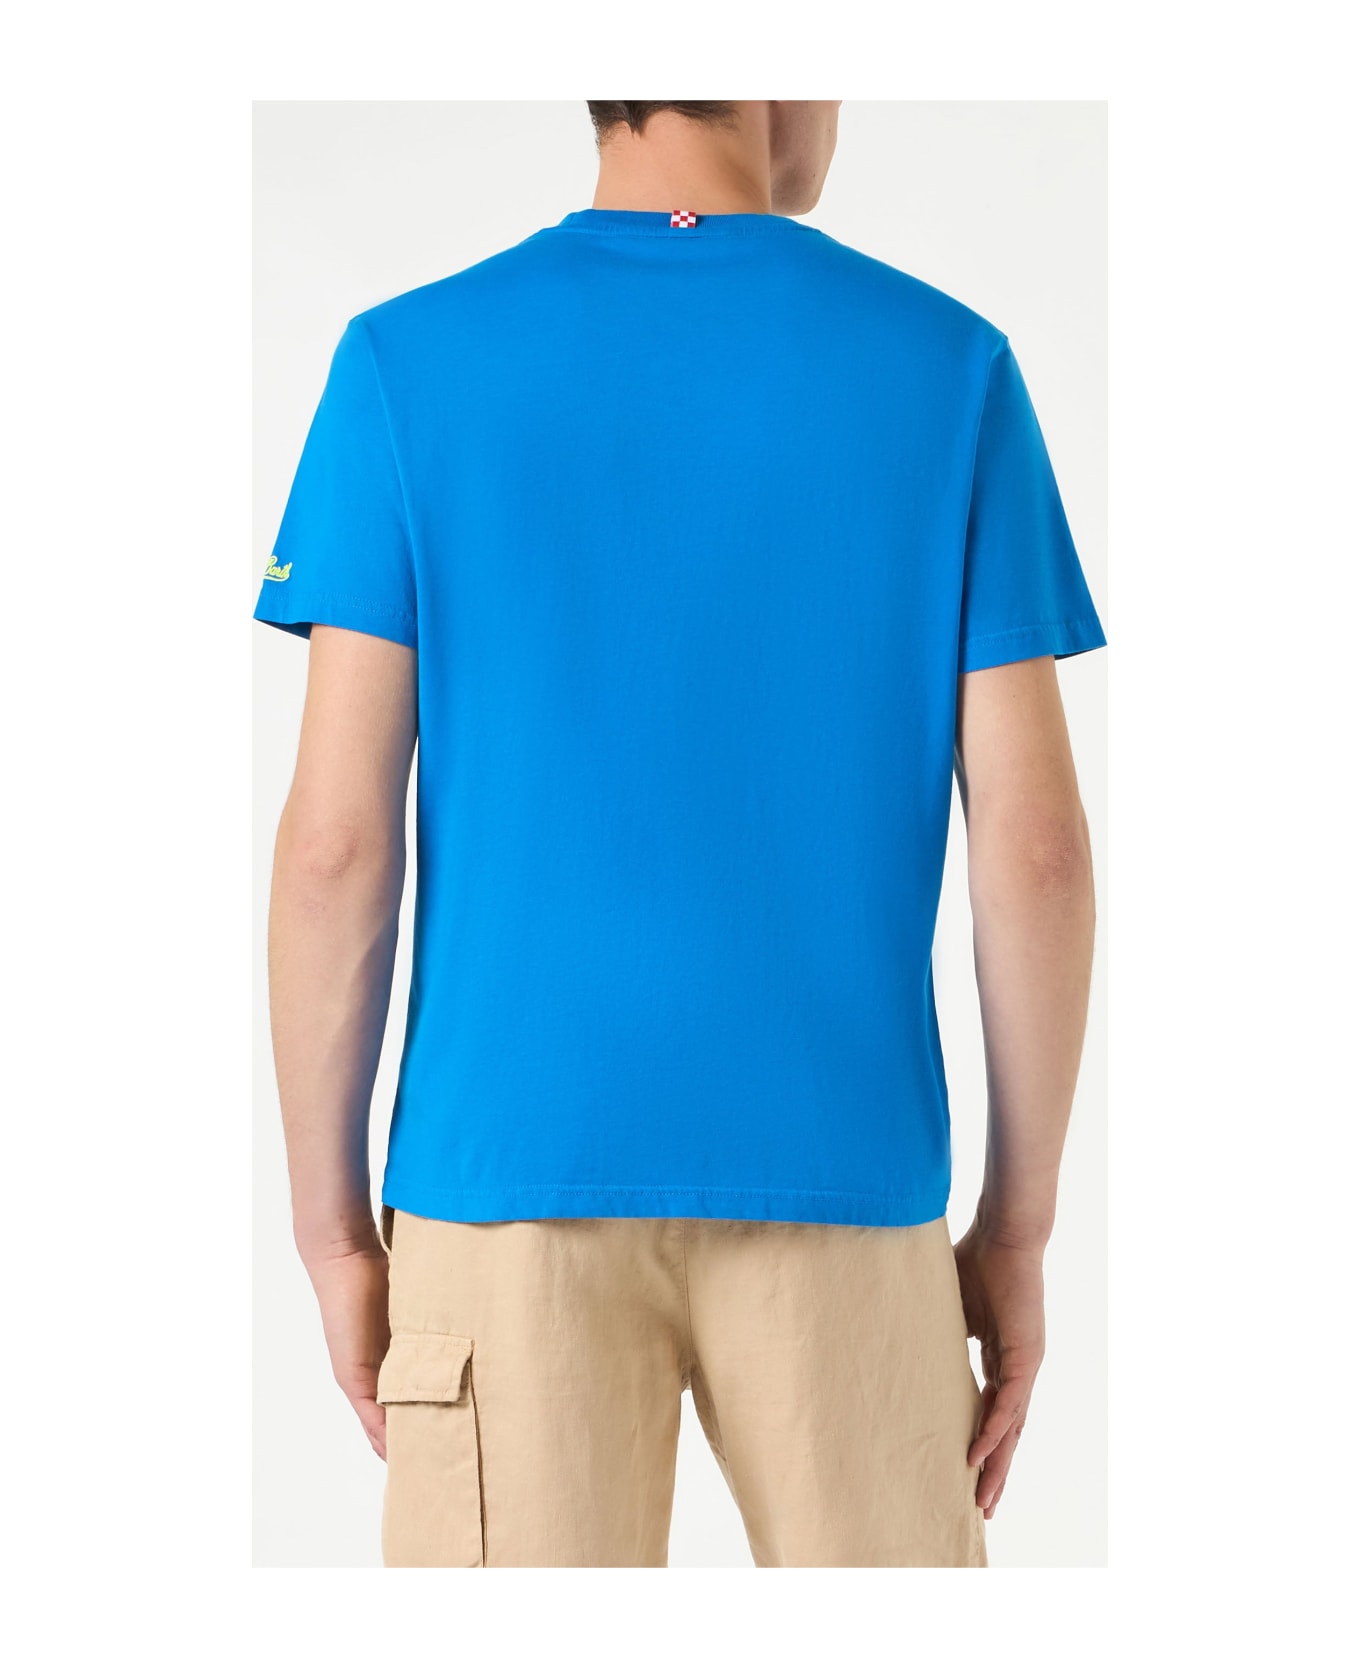 MC2 Saint Barth Man Cotton T-shirt With Snoopy Print | Snoopy - Peanuts Special Edition - BLUE